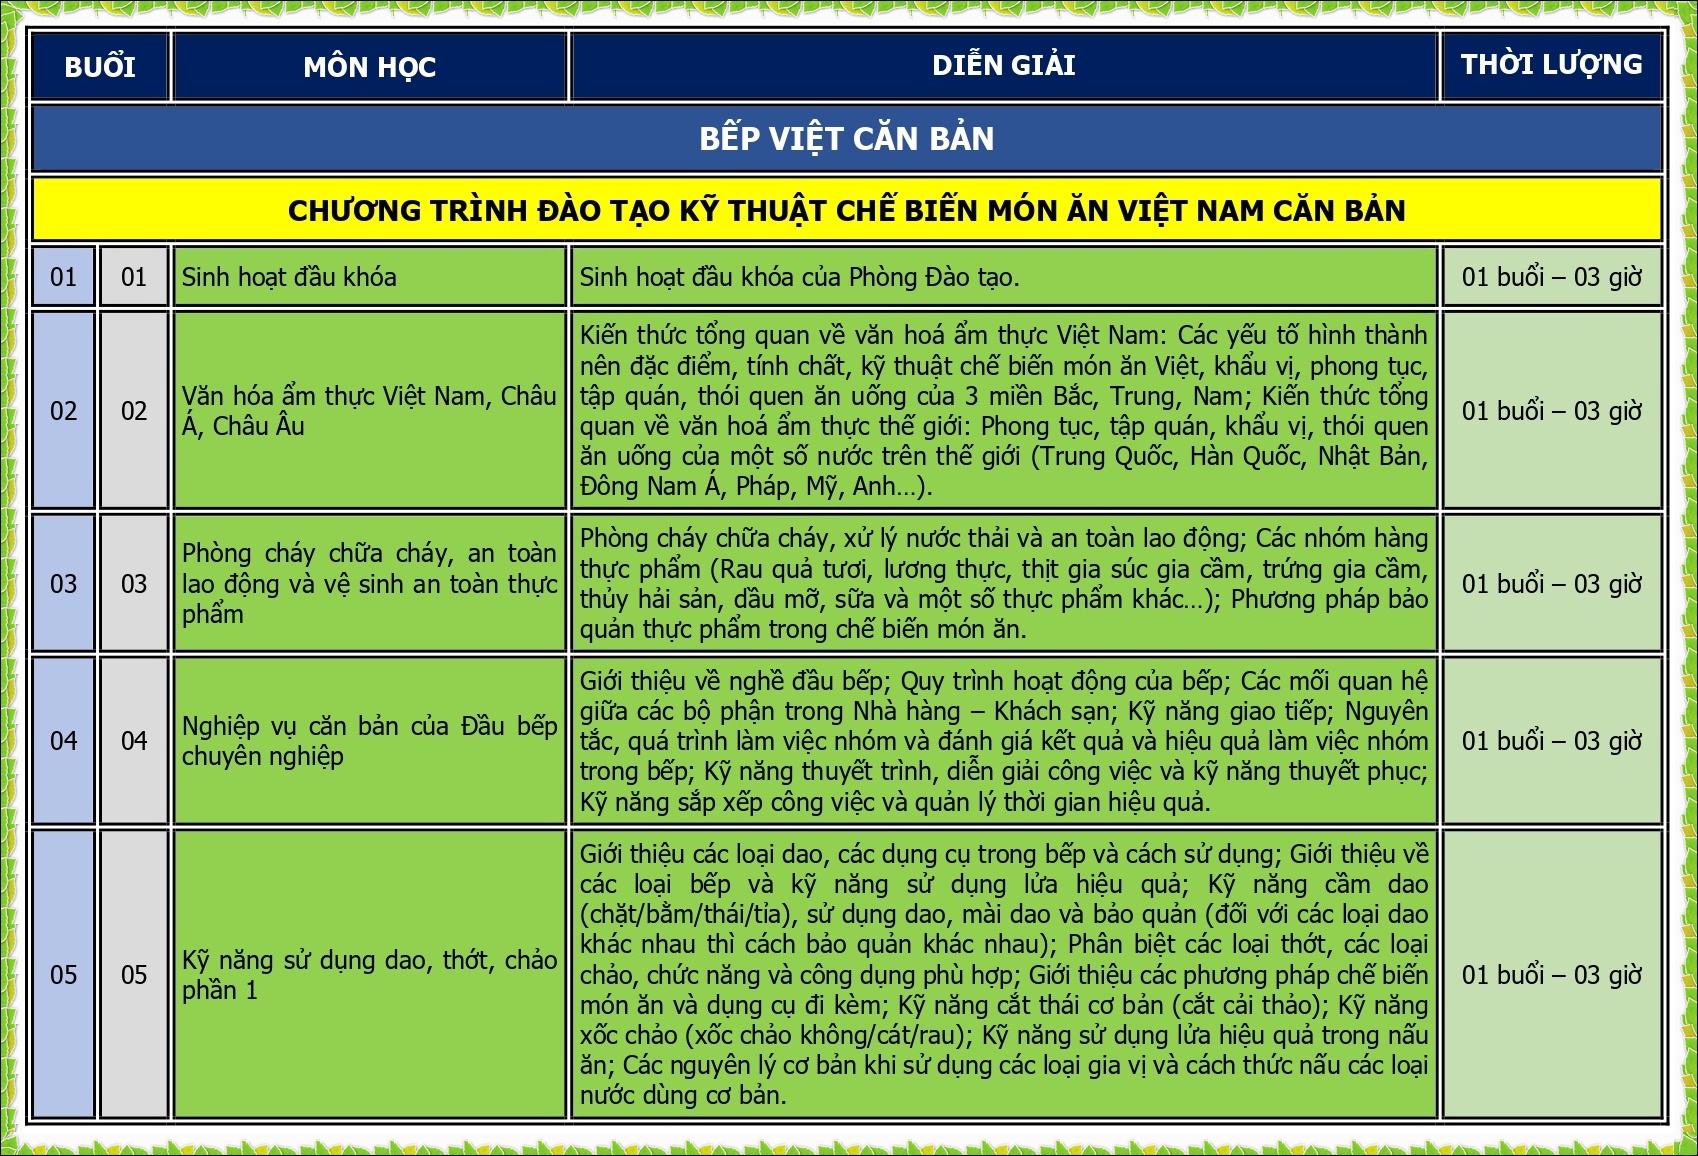 CT DAO TAO BEP VIET CAN BAN_page-0001